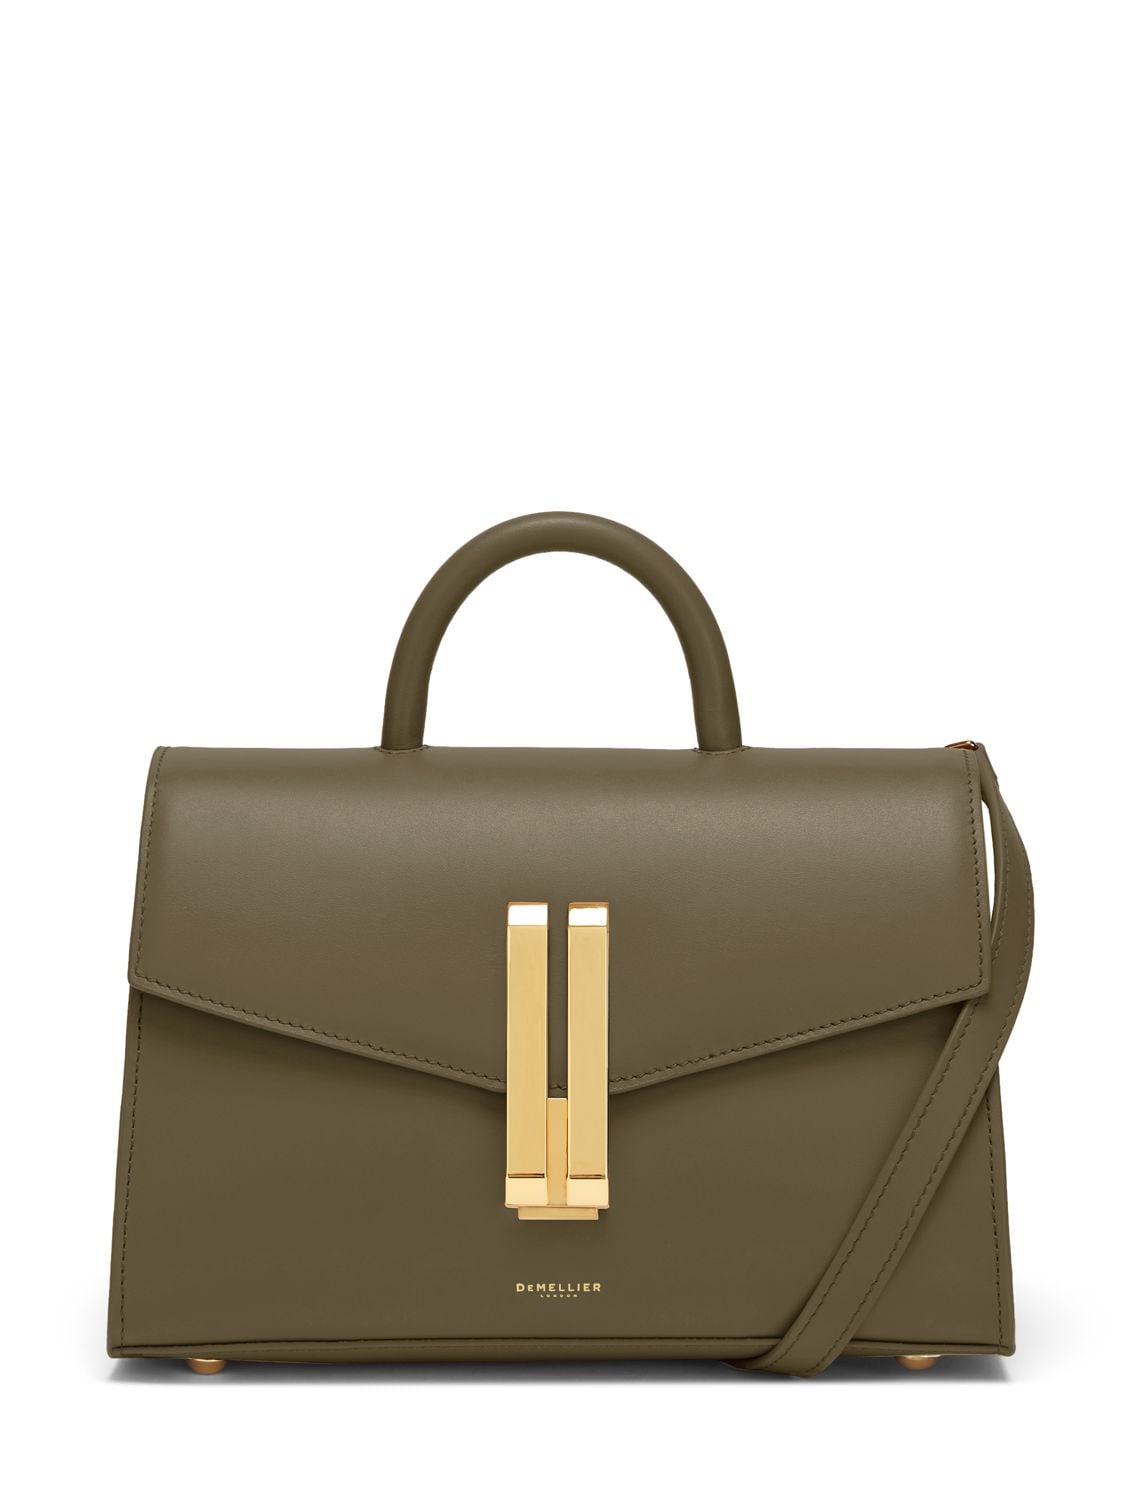 Demellier Midi Montreal Smooth Leather Bag In Olivgrün